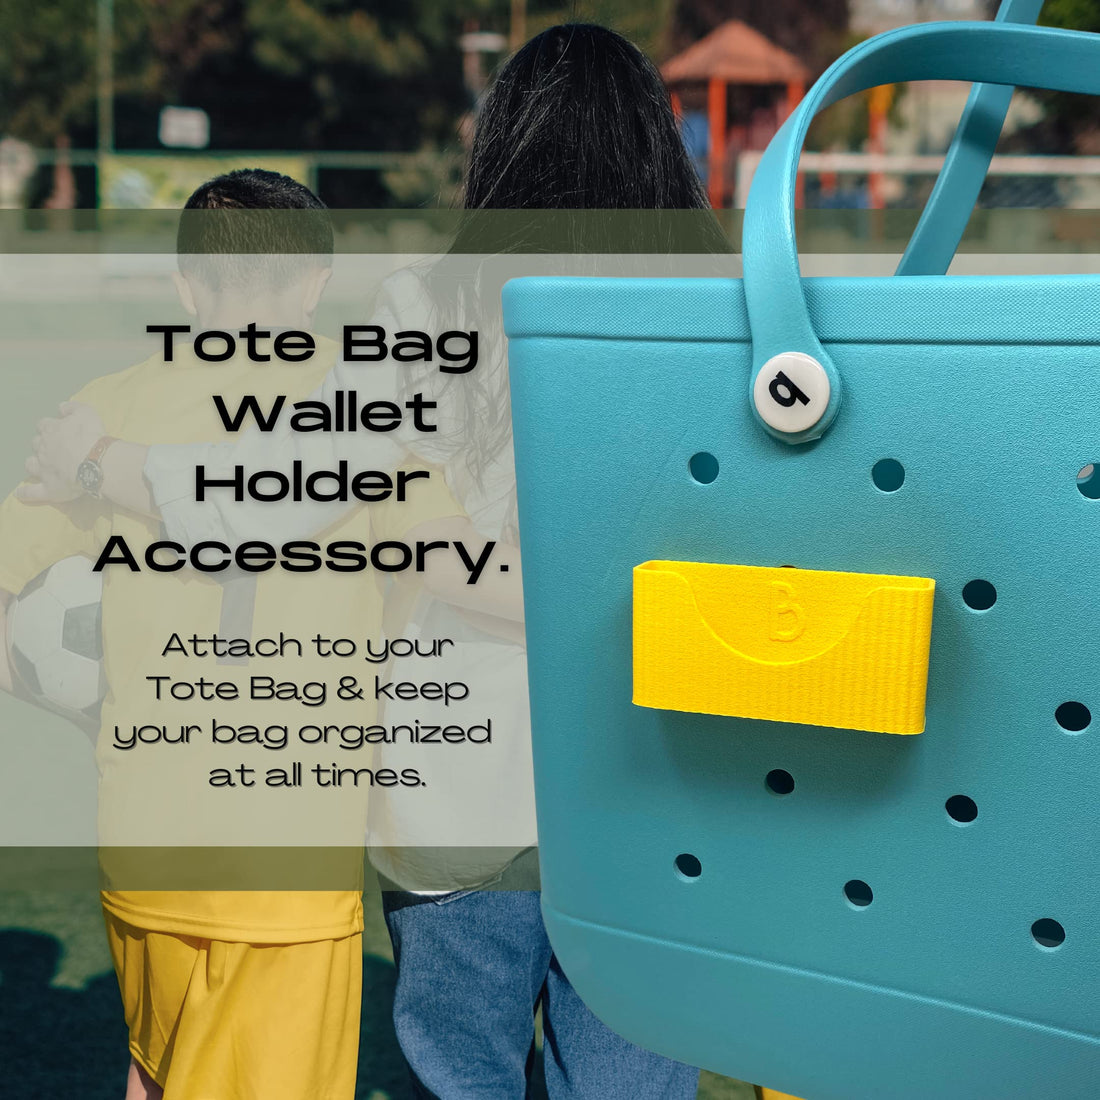 Boglets - Accessories for Bogg Bags & Simply Southern Tote Bags